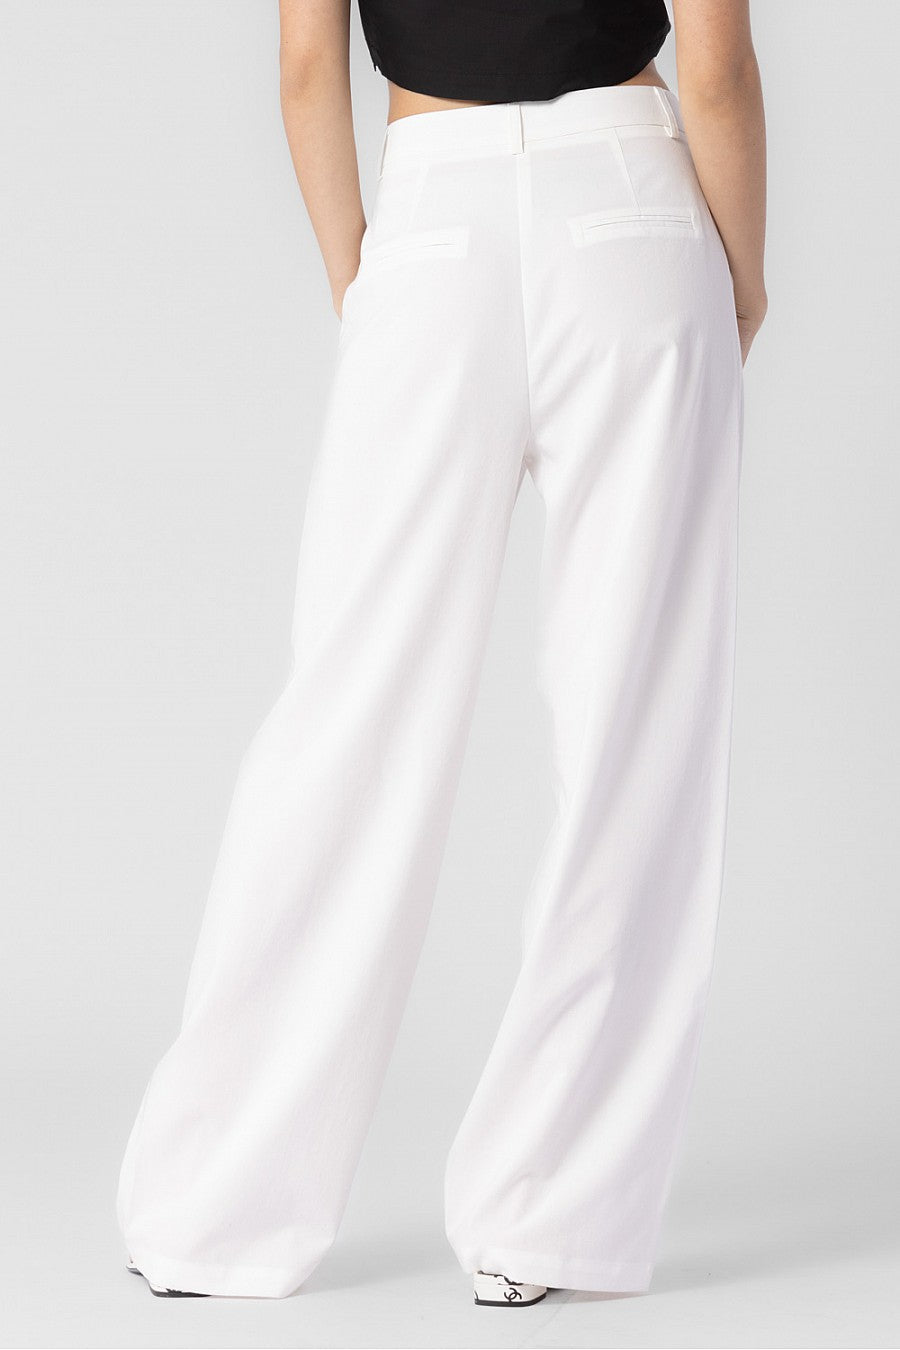 bride tribe tailored pants